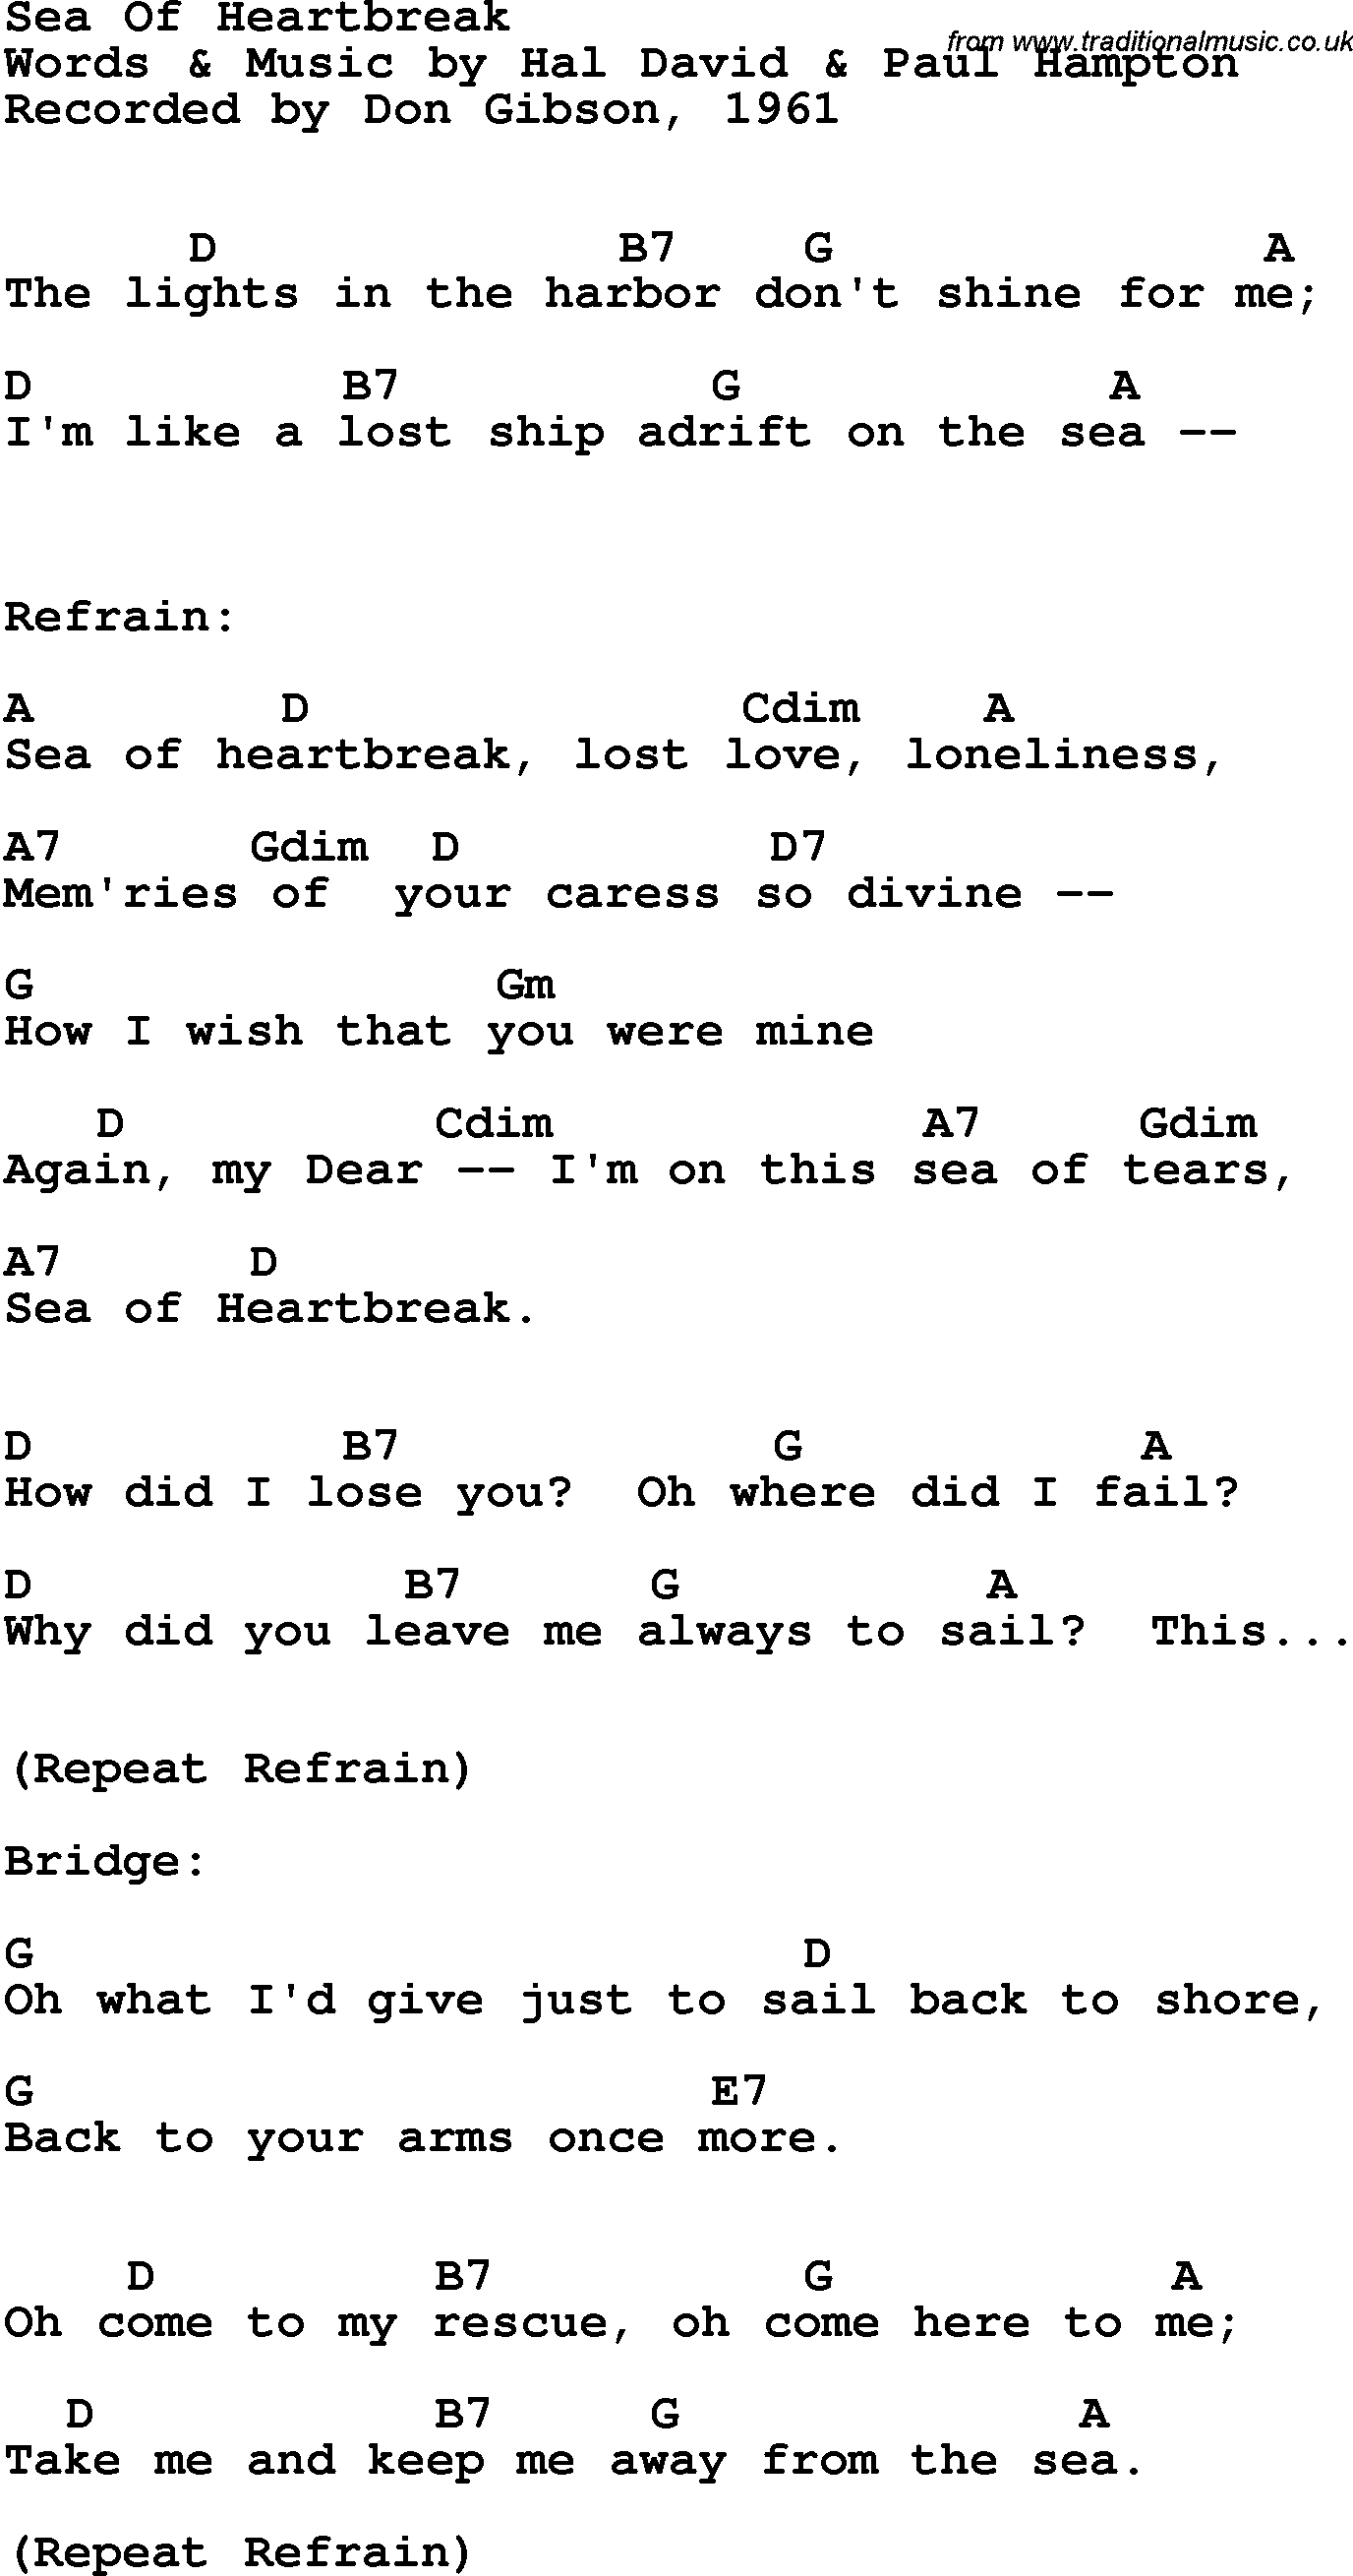 Song Lyrics with guitar chords for Sea Of Heartbreak - Don Gibson, 1961